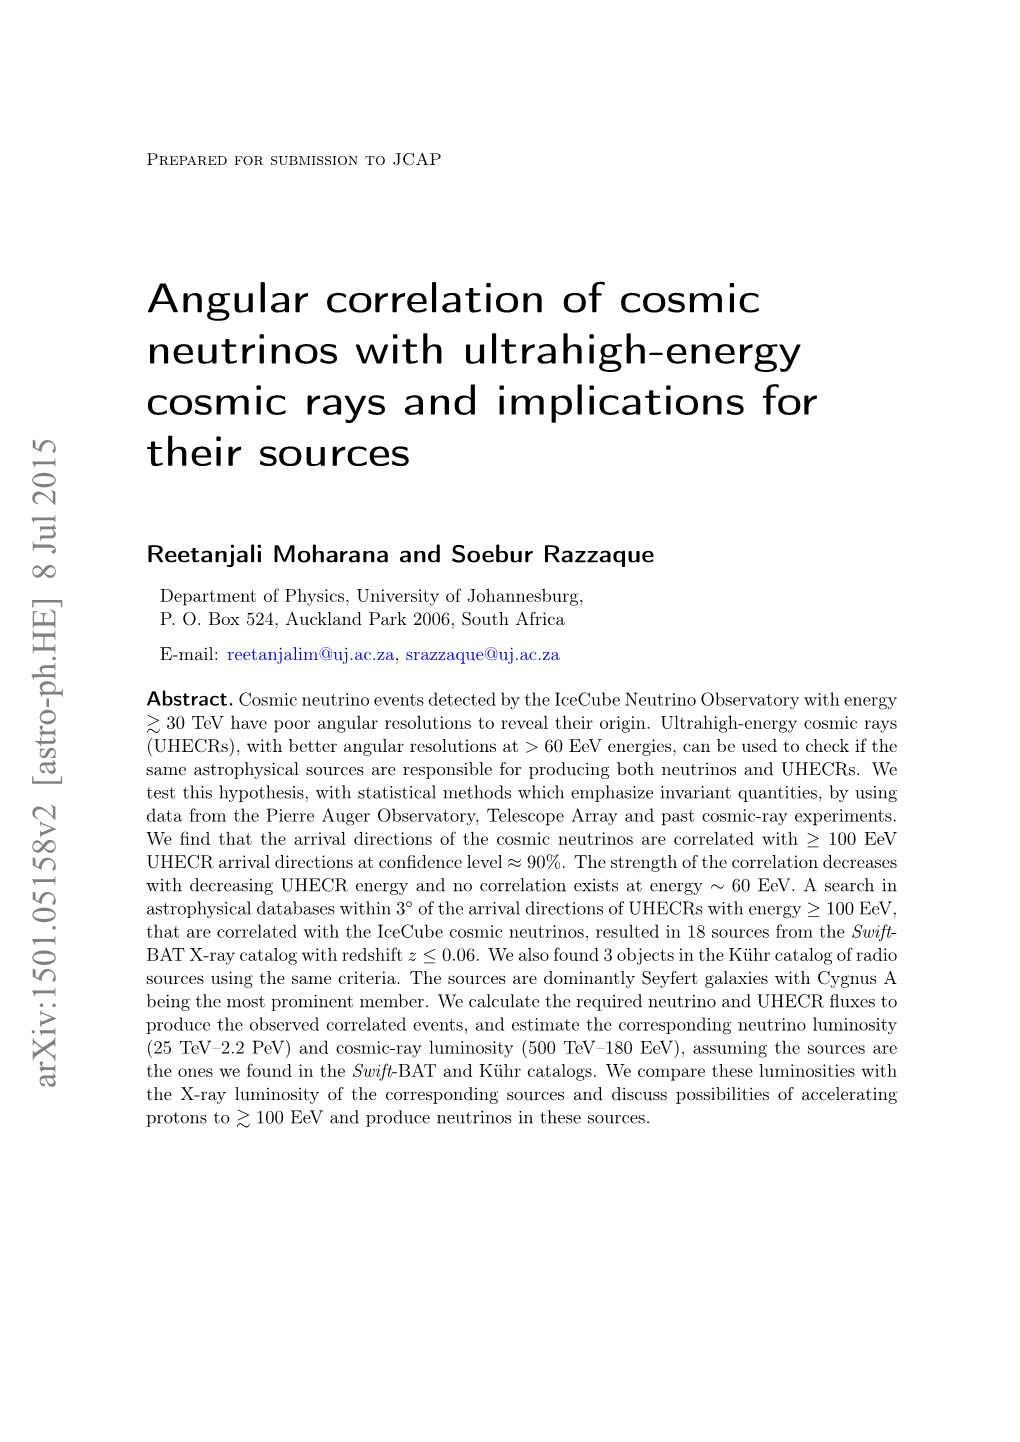 Angular Correlation of Cosmic Neutrinos with Ultrahigh-Energy Cosmic Rays and Implications for Their Sources